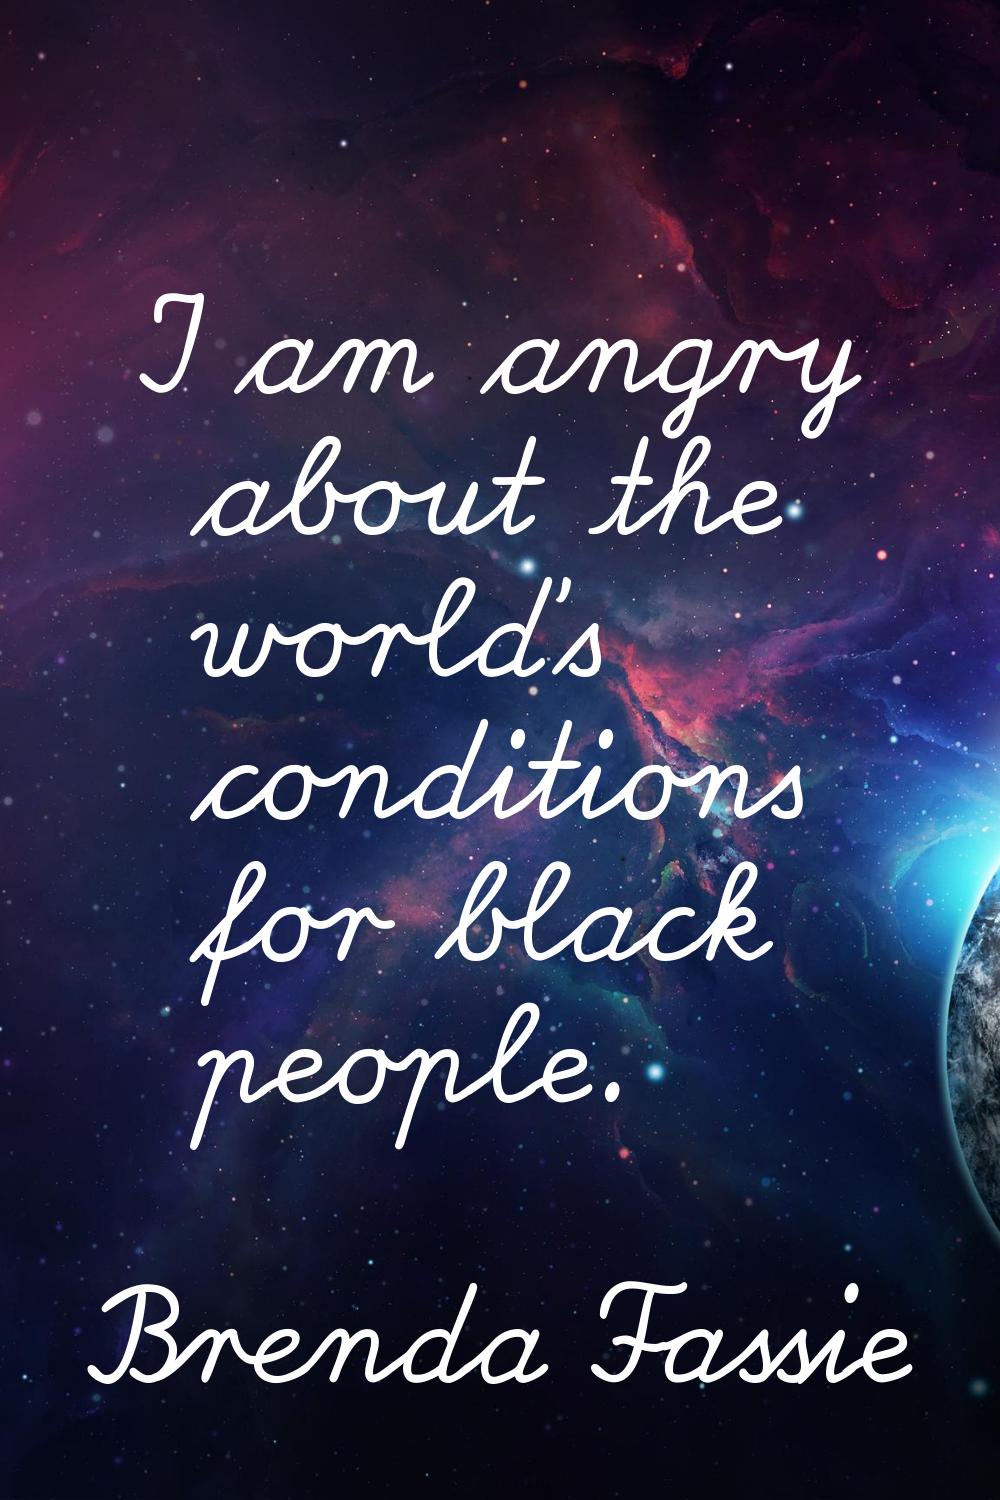 I am angry about the world's conditions for black people.